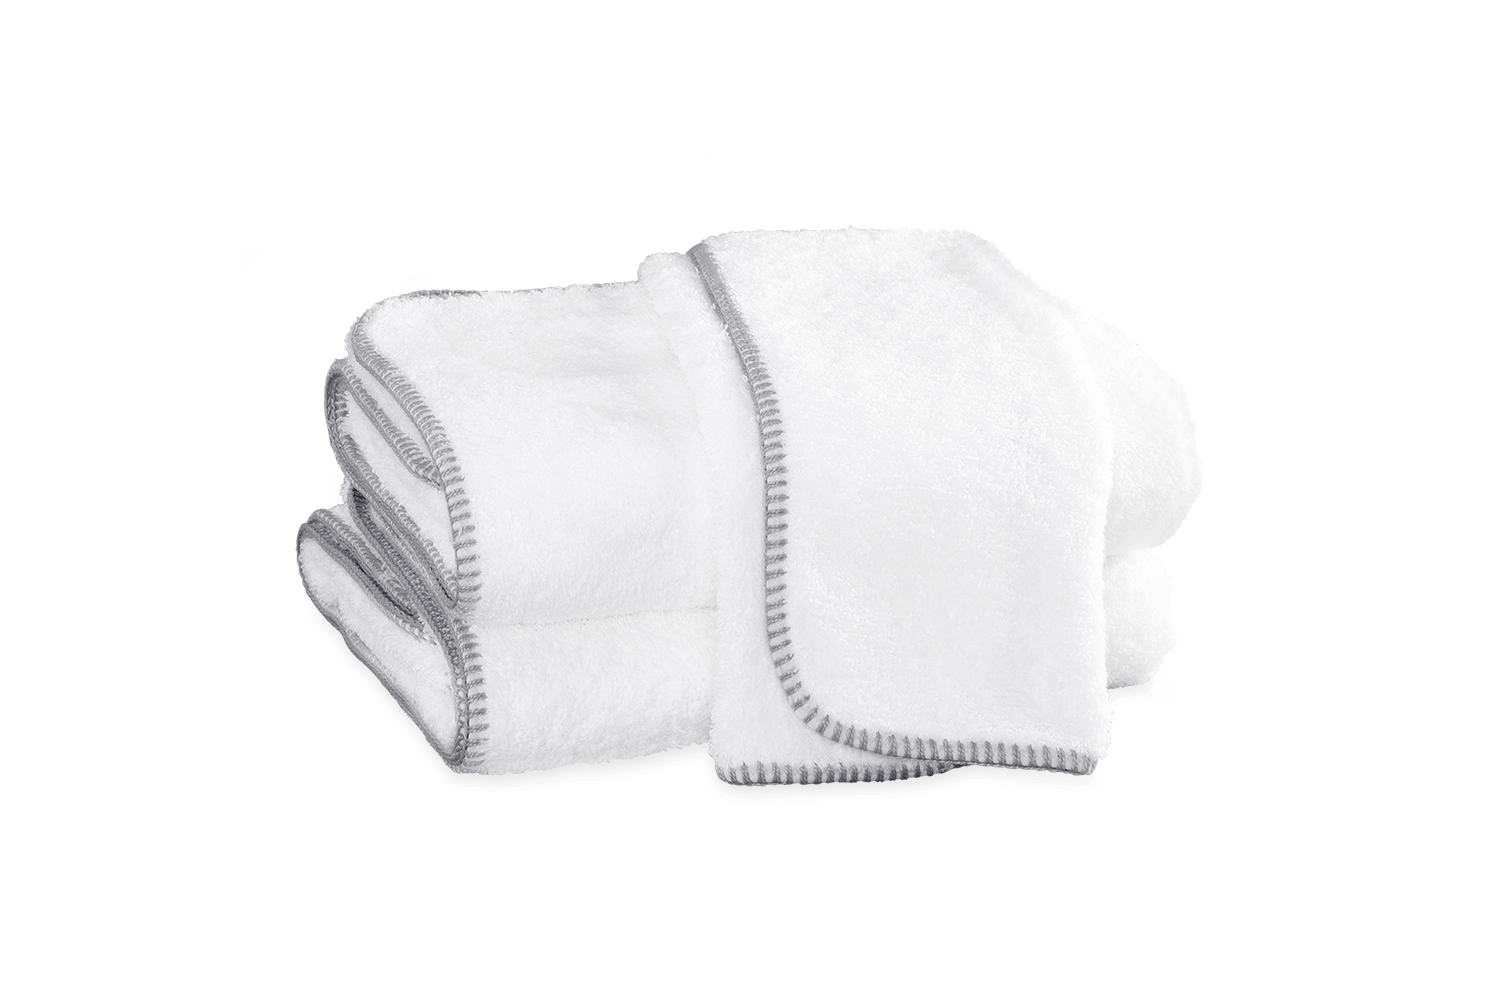 https://matouk-website.imgix.net/spree/products/6210/original/Whipstitch_towels_Nickle_primary.png?1582039627